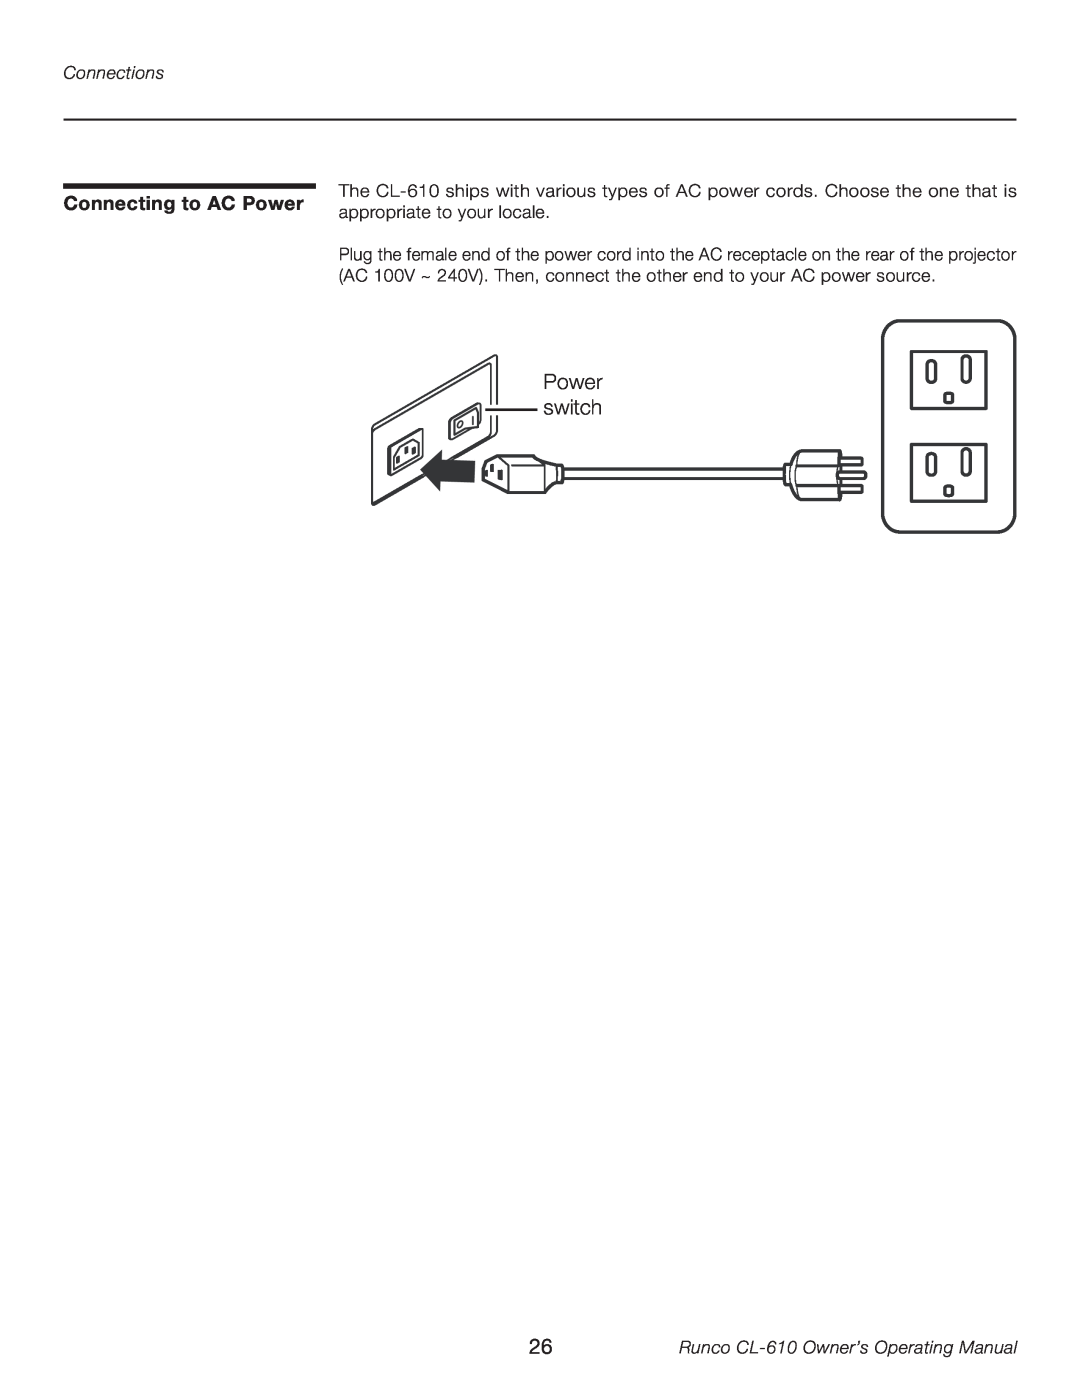 Runco CL-610LT manual Connecting to AC Power, Power switch, Connections, Runco CL-610 Owner’s Operating Manual 